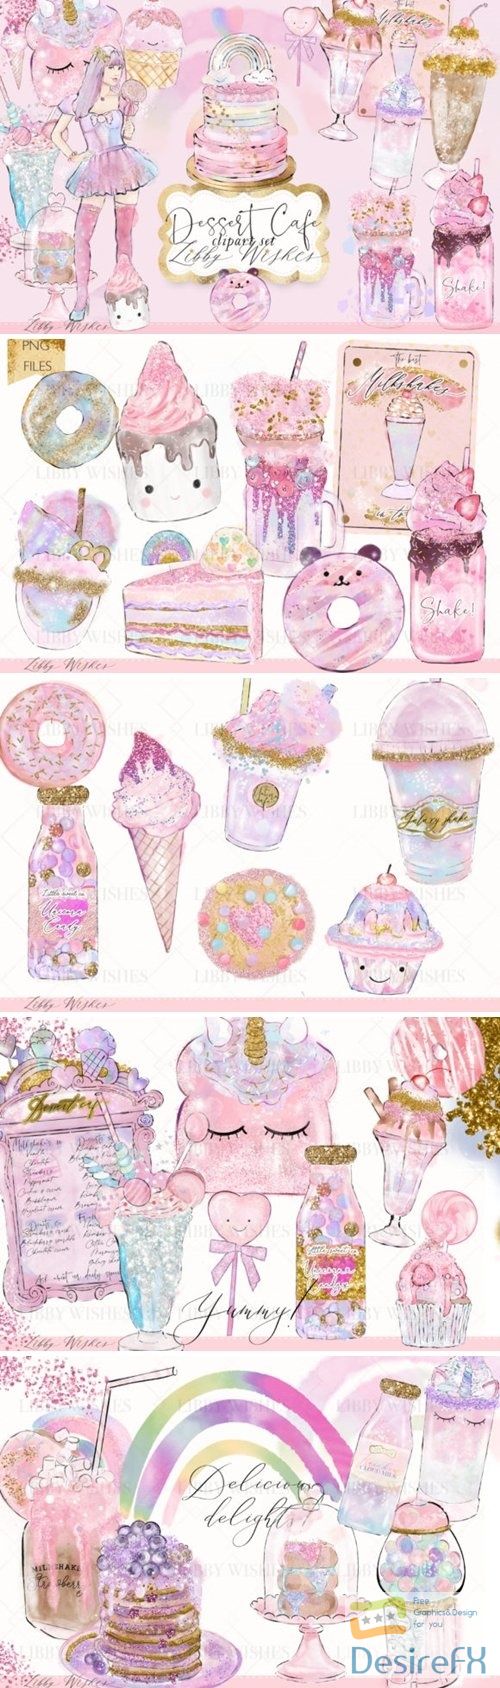 Sweet cafe Watercolour illustrations - 4637571